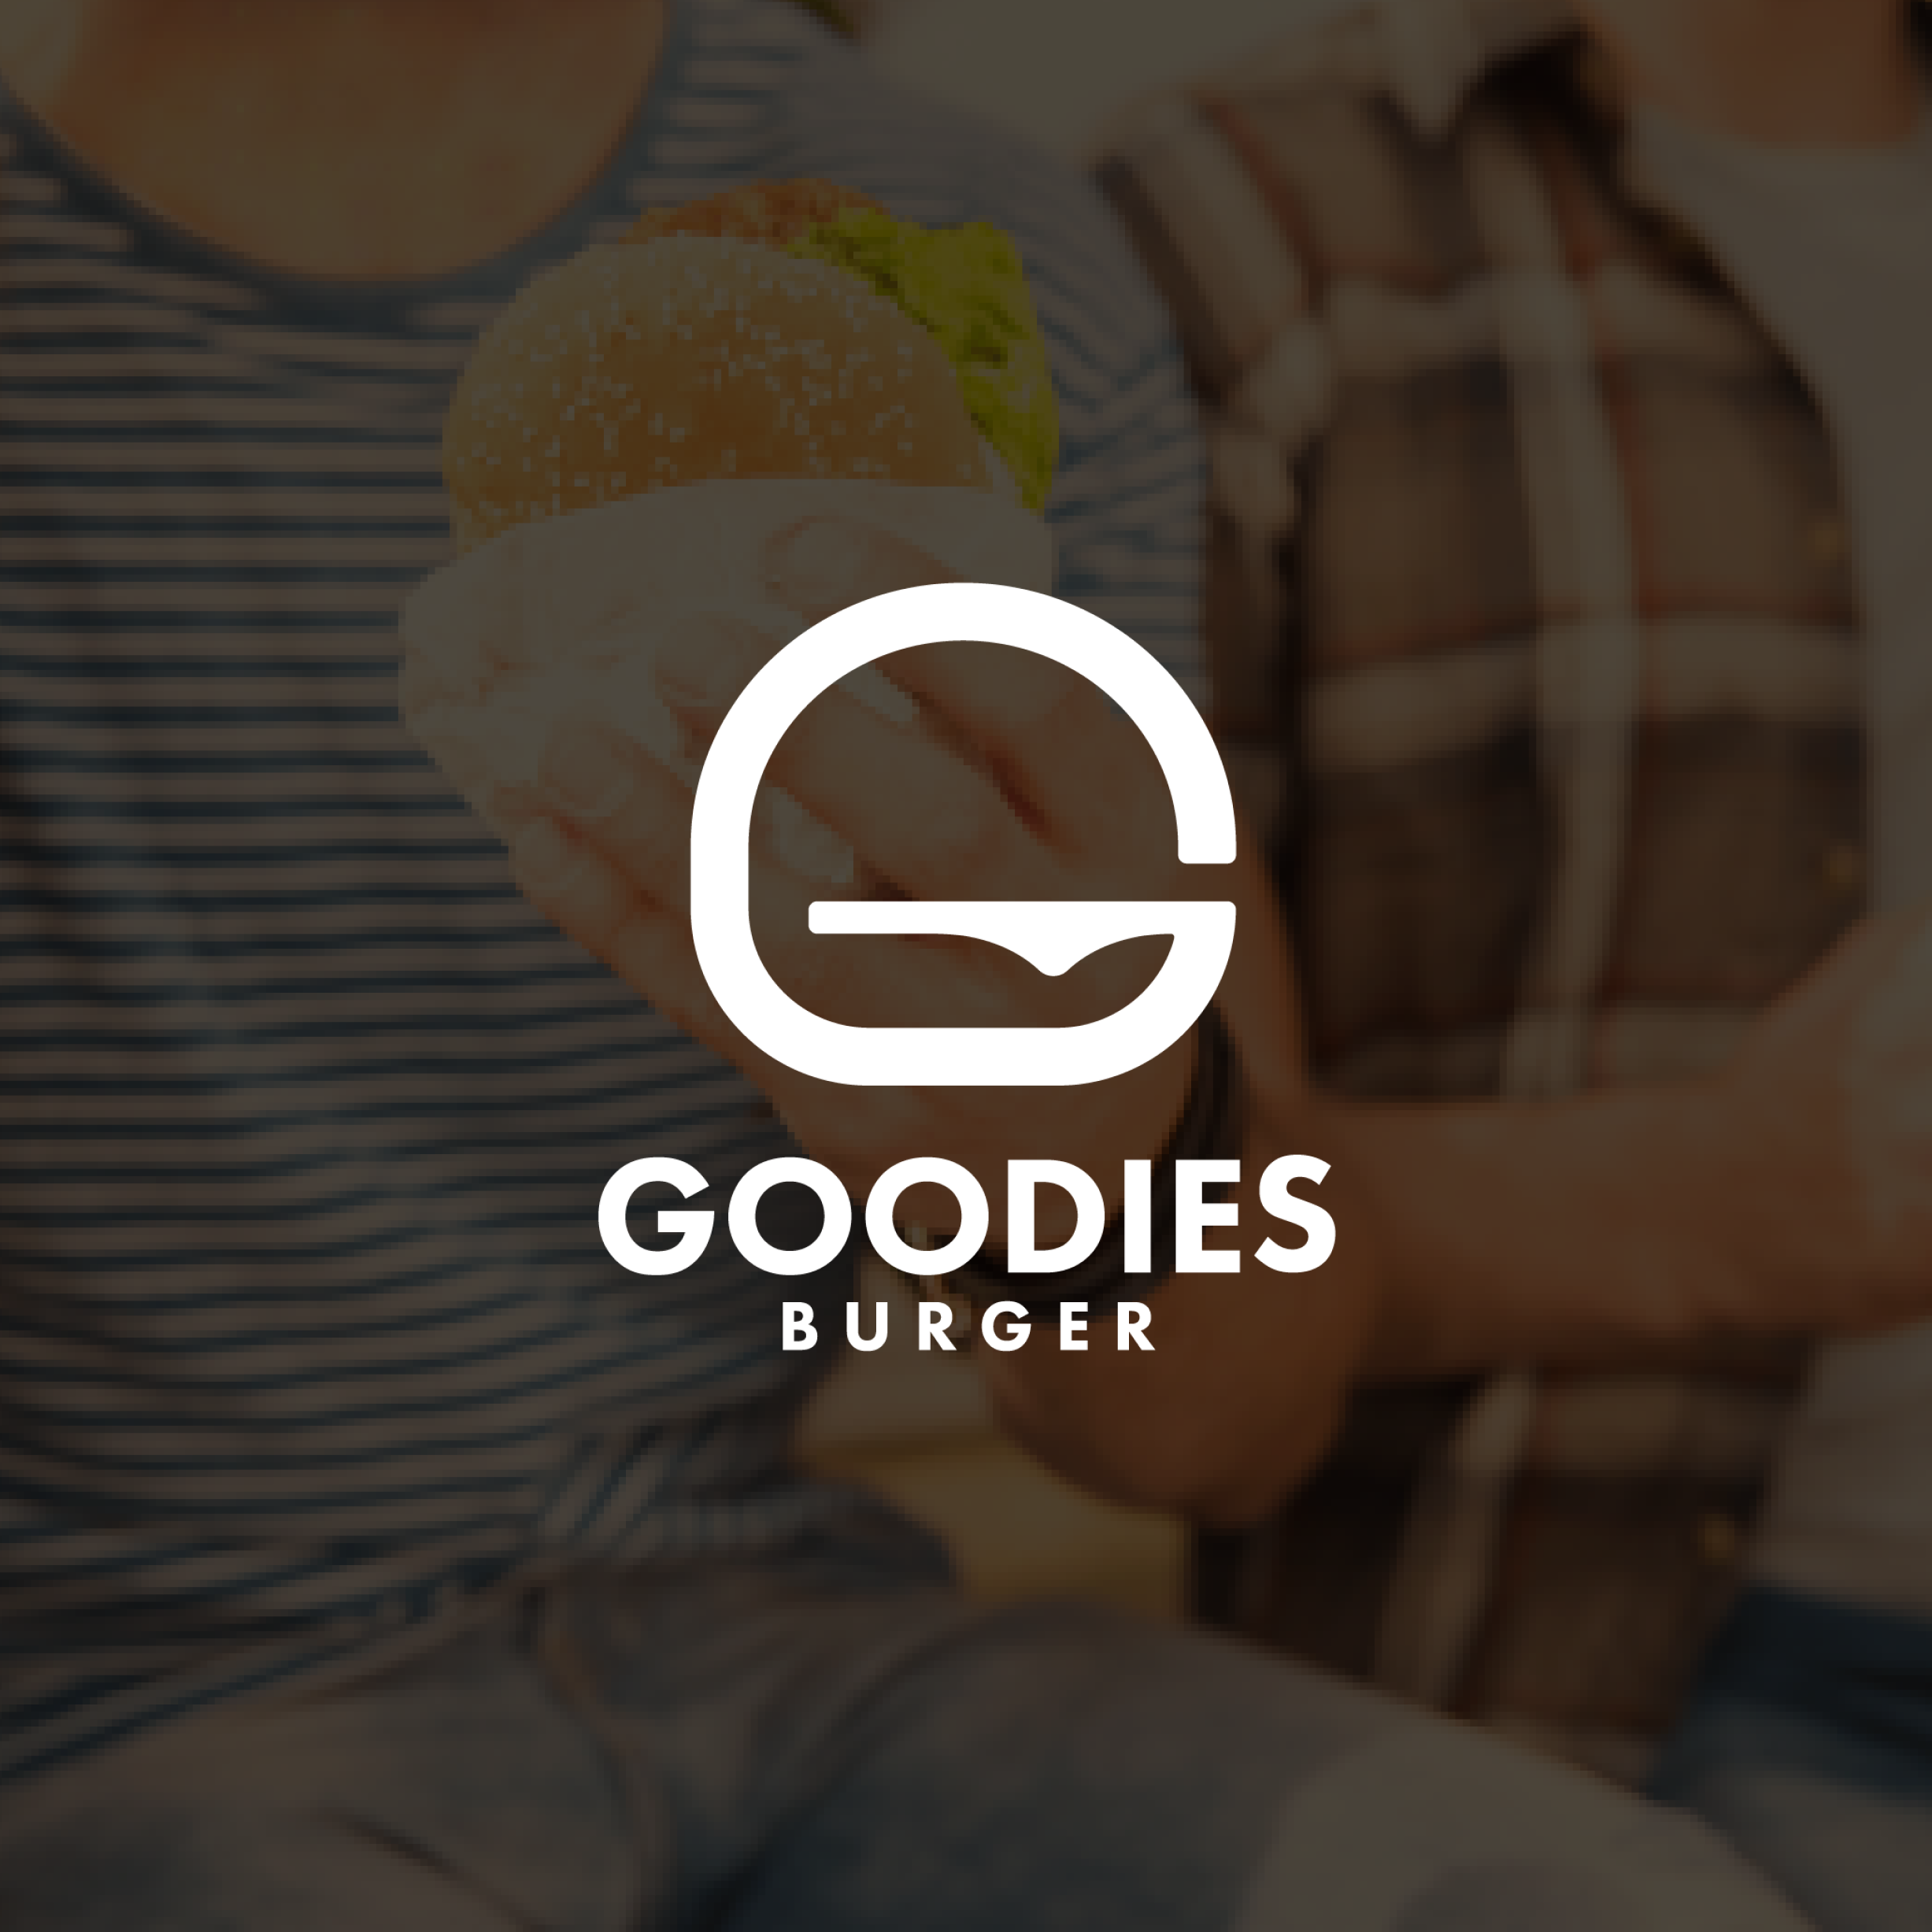 Cover Image for Goodies Burger